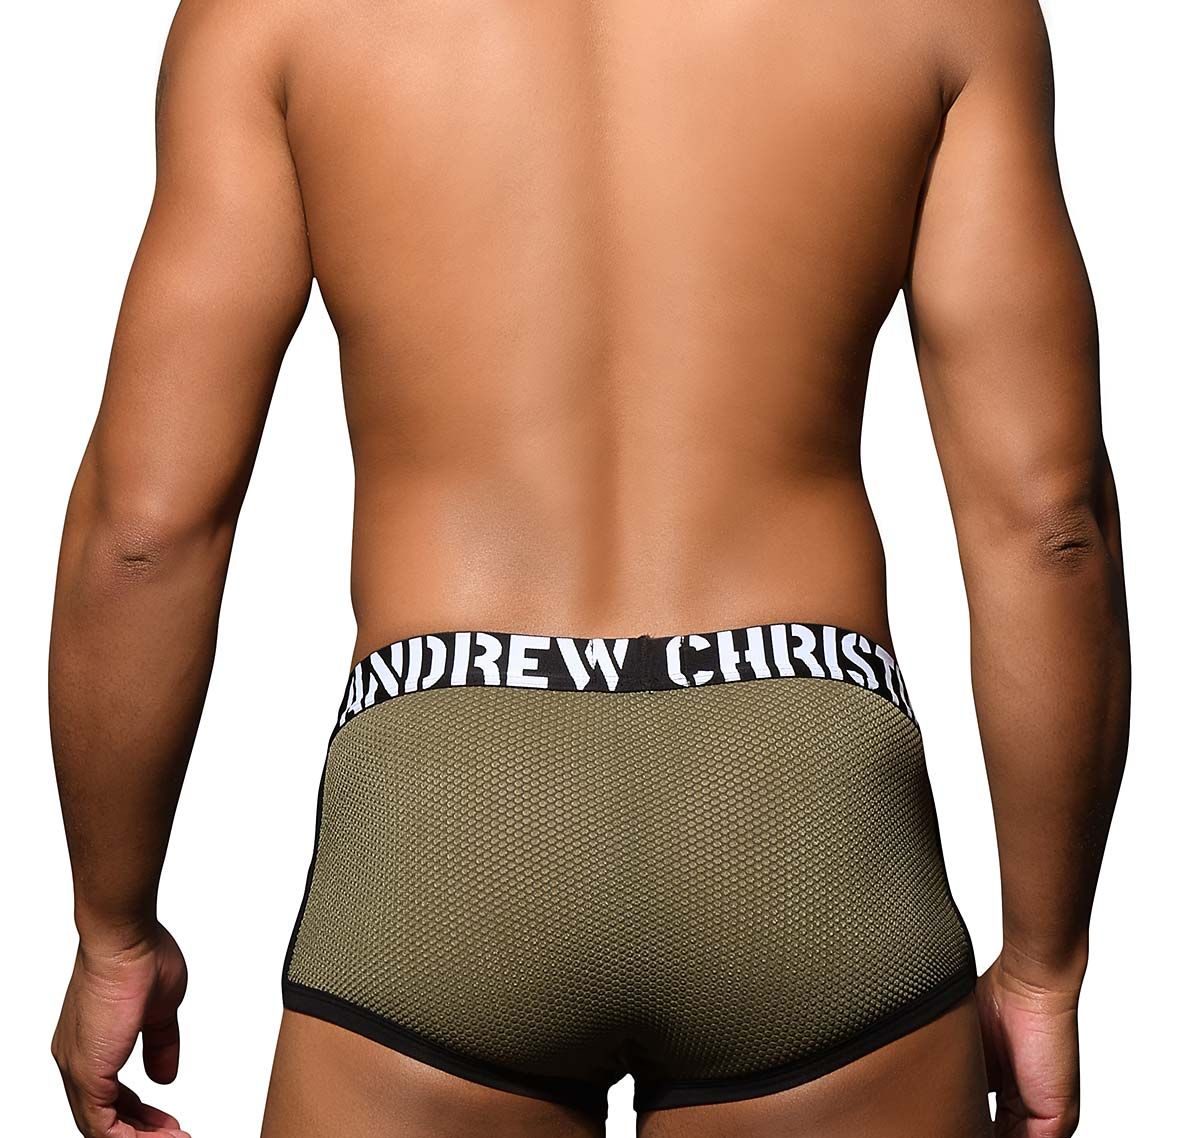 Andrew Christian Boxers Military MESH BOXER w/ ALMOST NAKED 92596, green